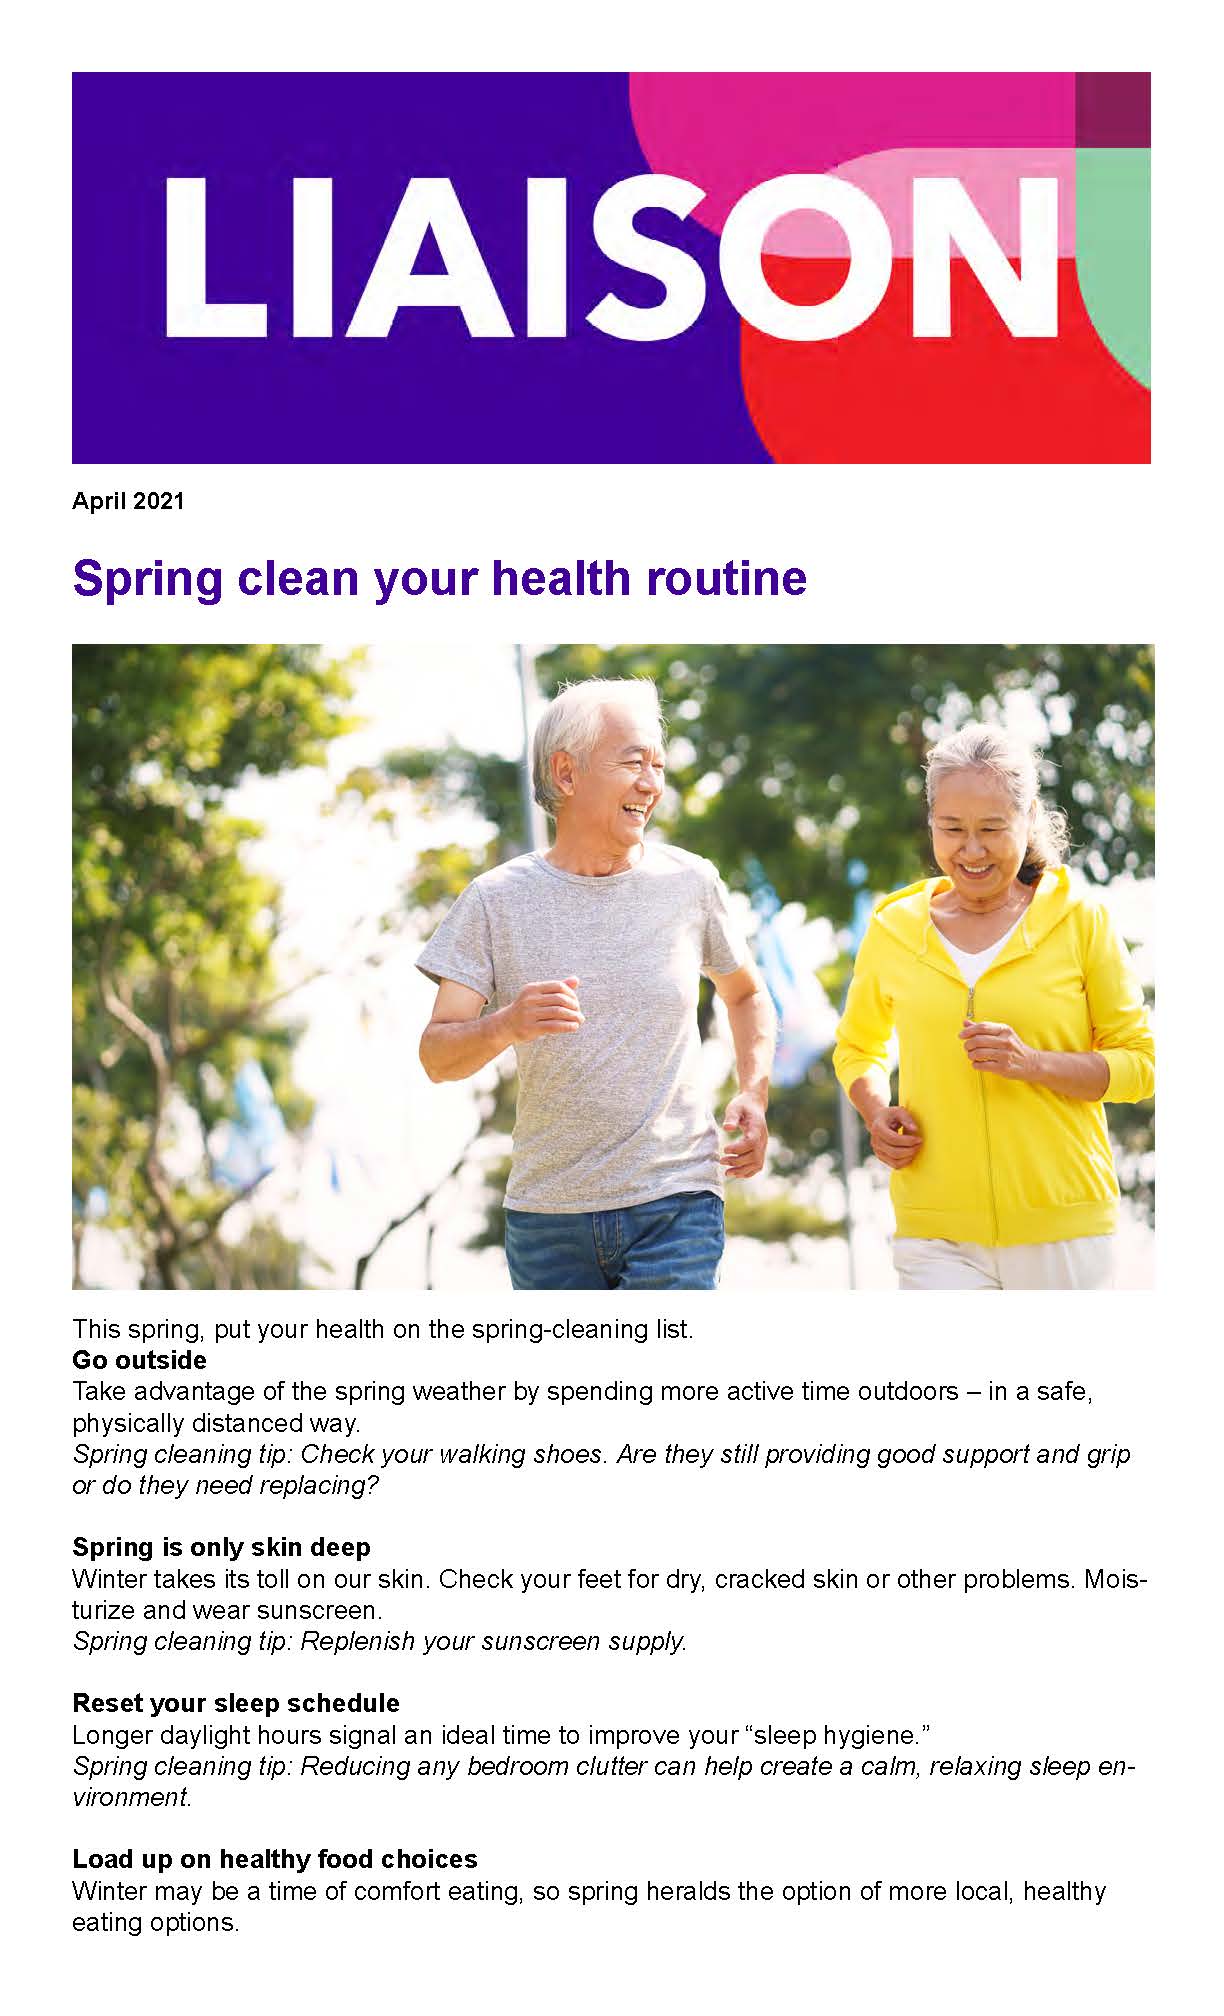 Spring clean your health routine